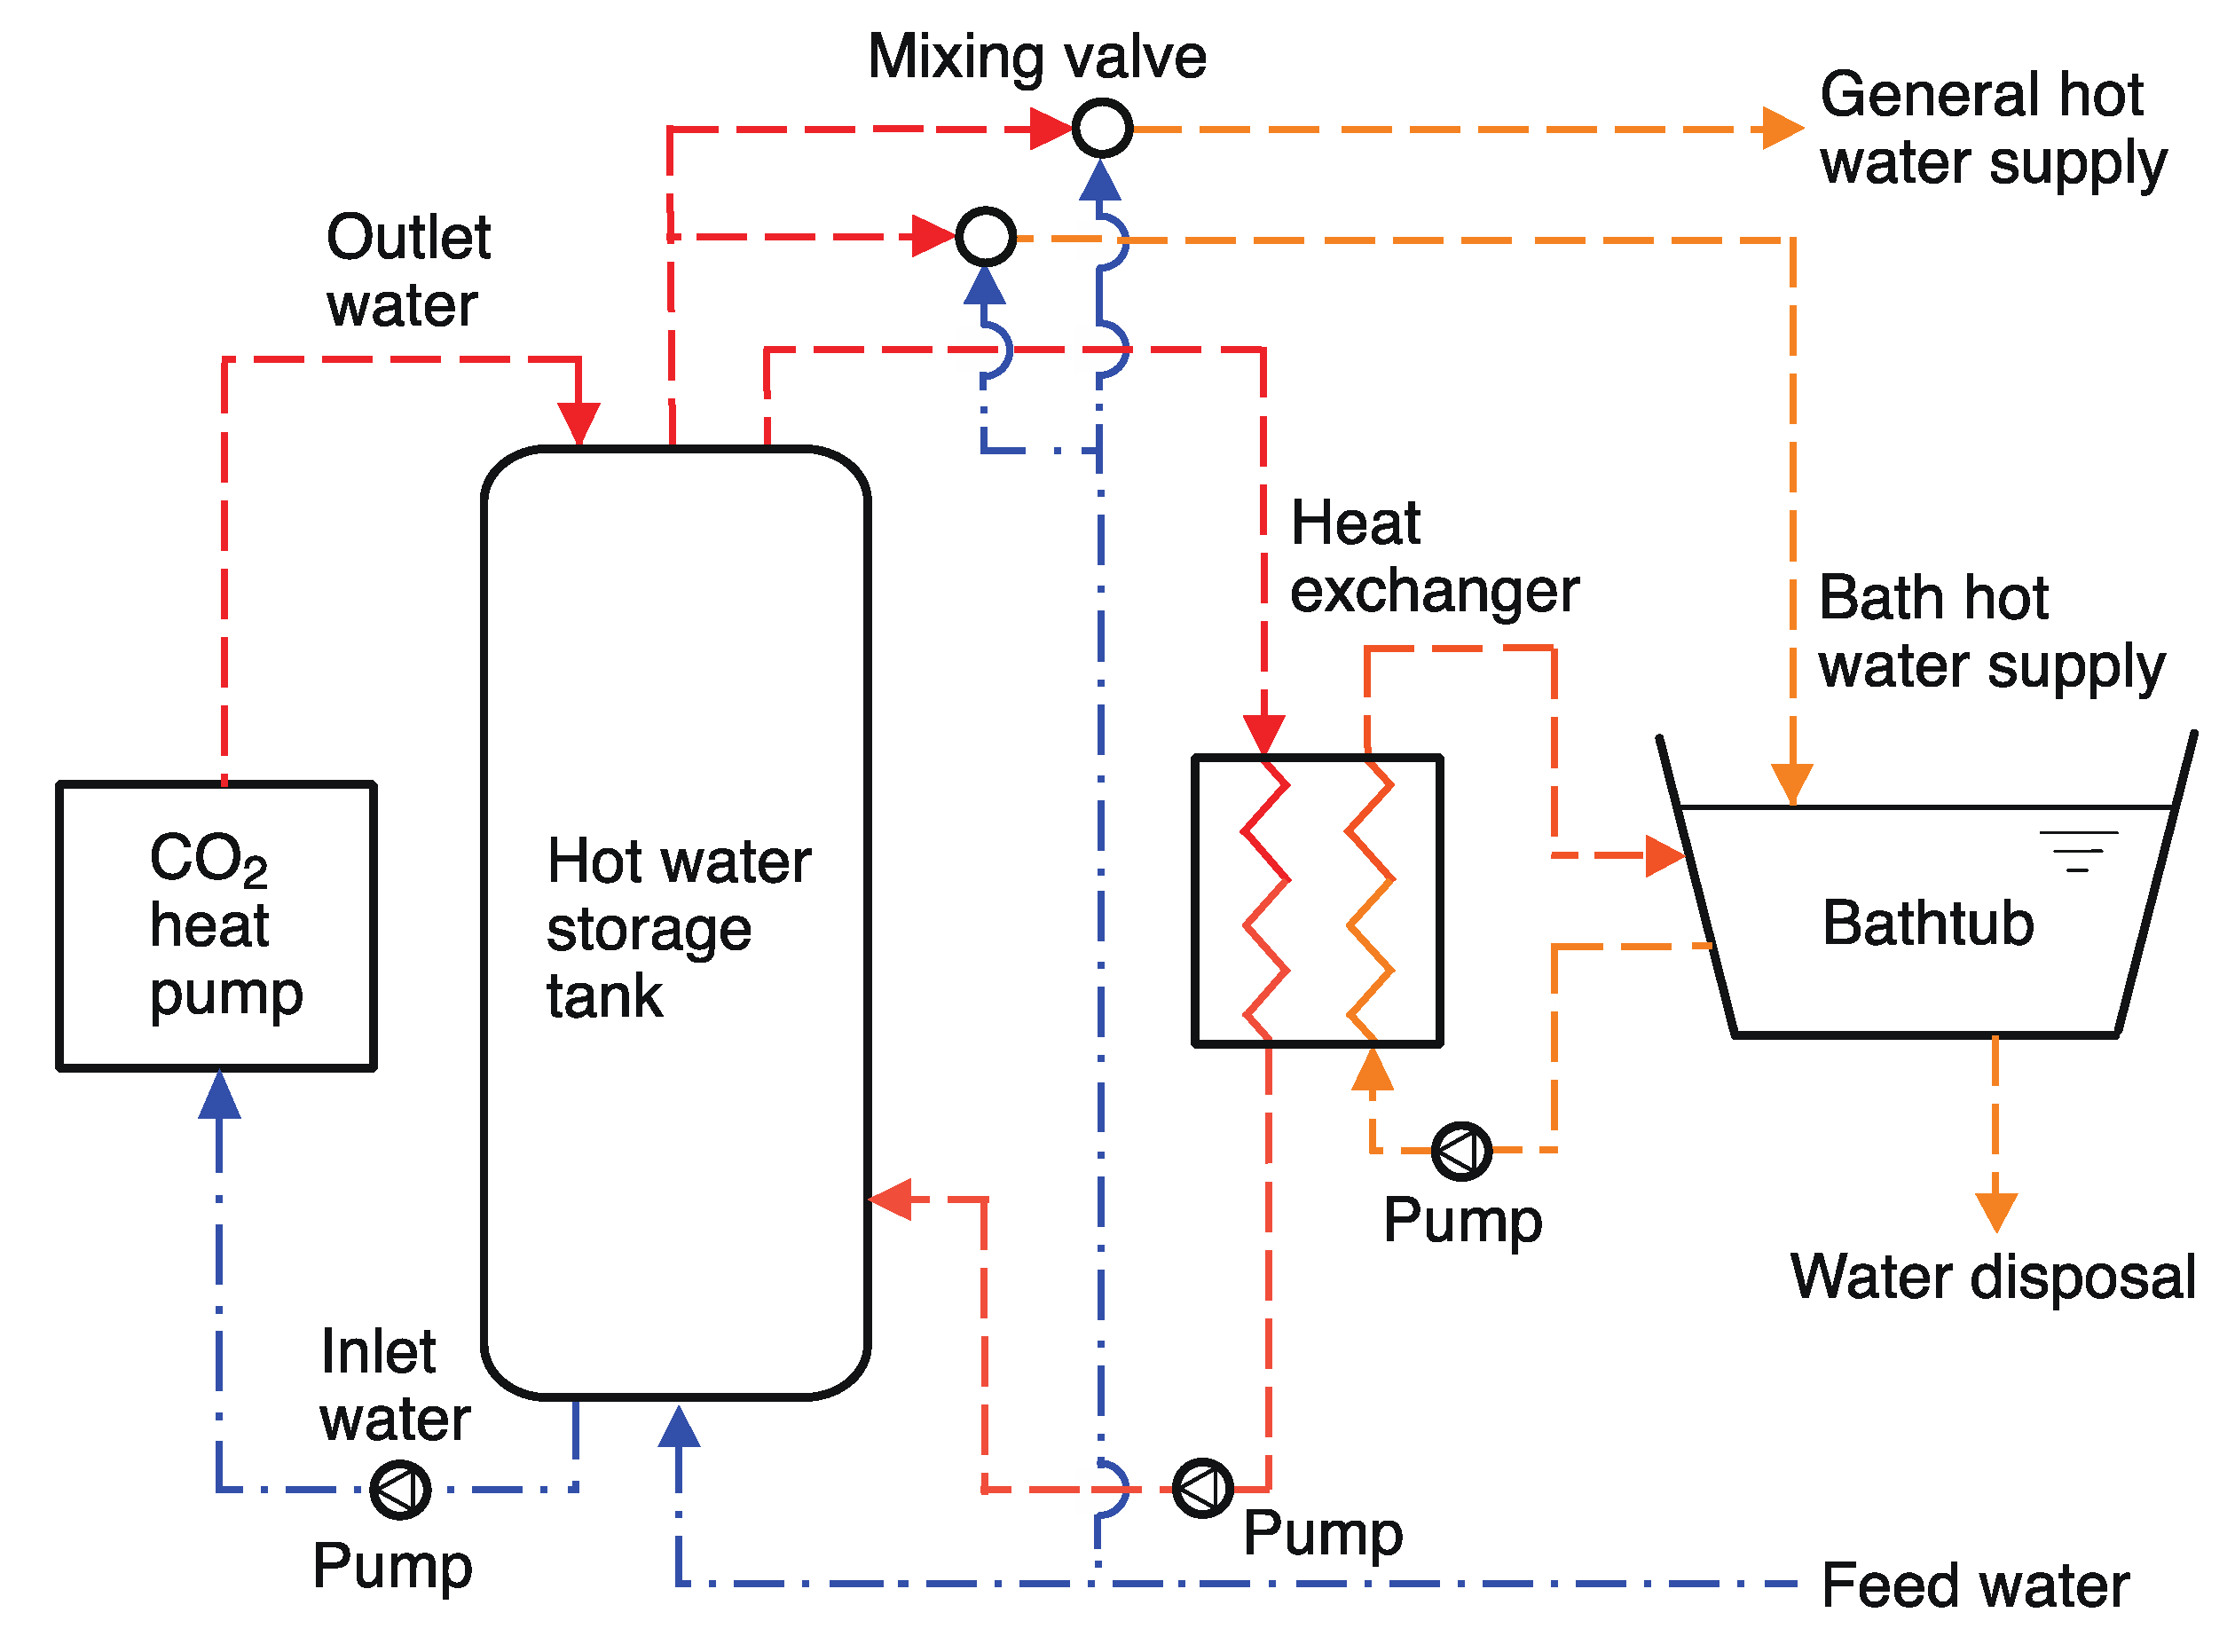 Sciences | Free Full-Text | Numerical Analysis for Performance Evaluation of a Heat Pump Water Heating